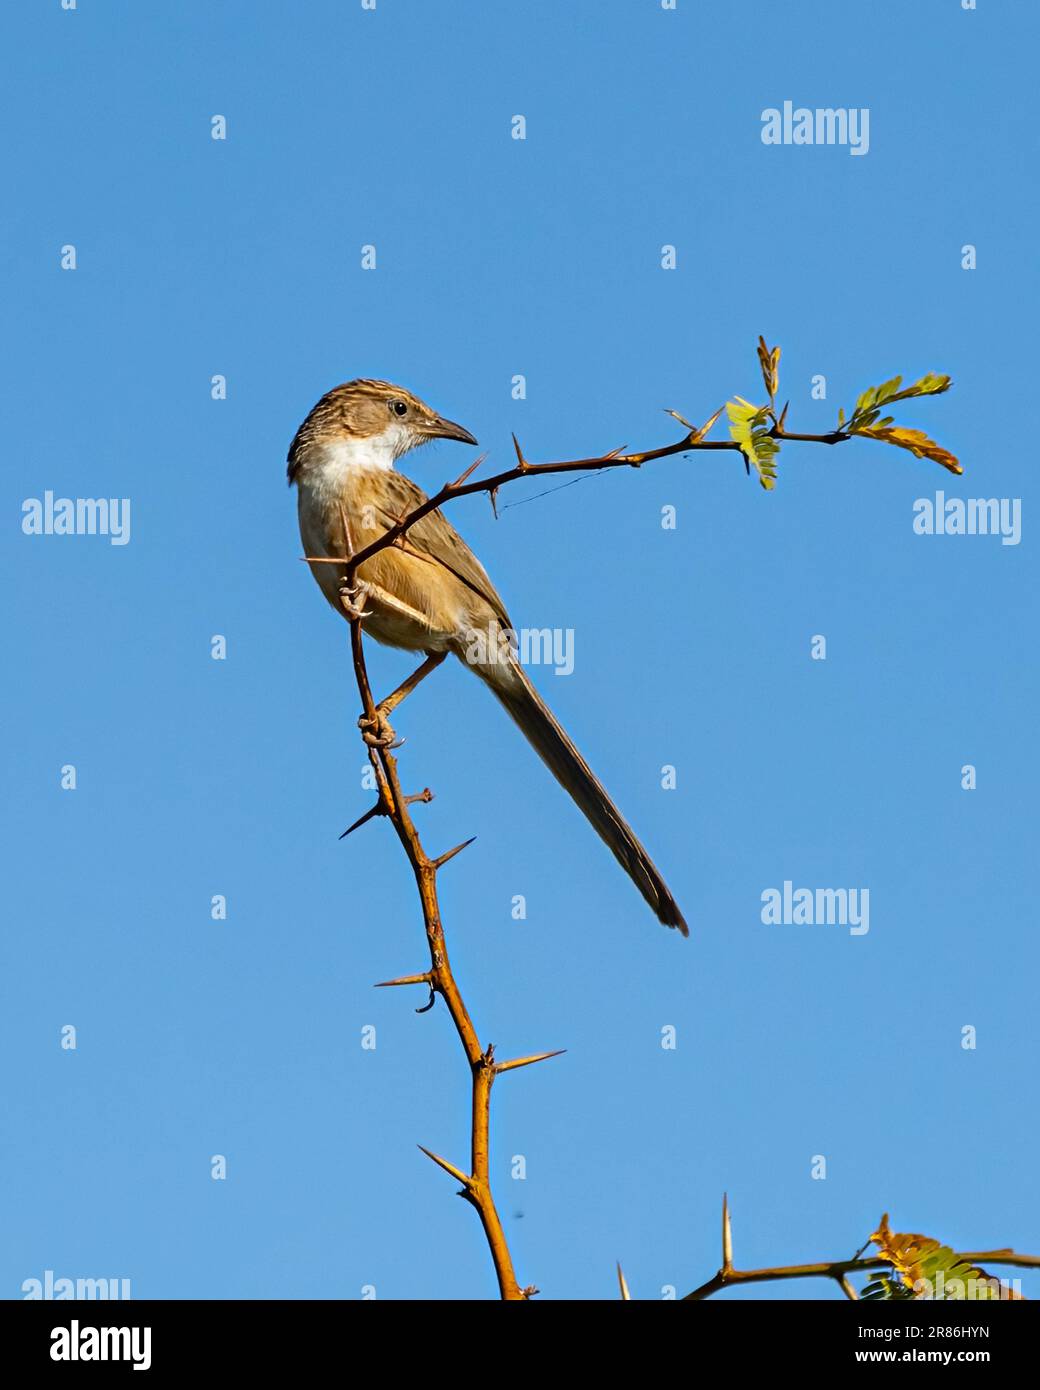 A small Round head bird perched on a slender branch of a tree as it surveys its surroundings Stock Photo